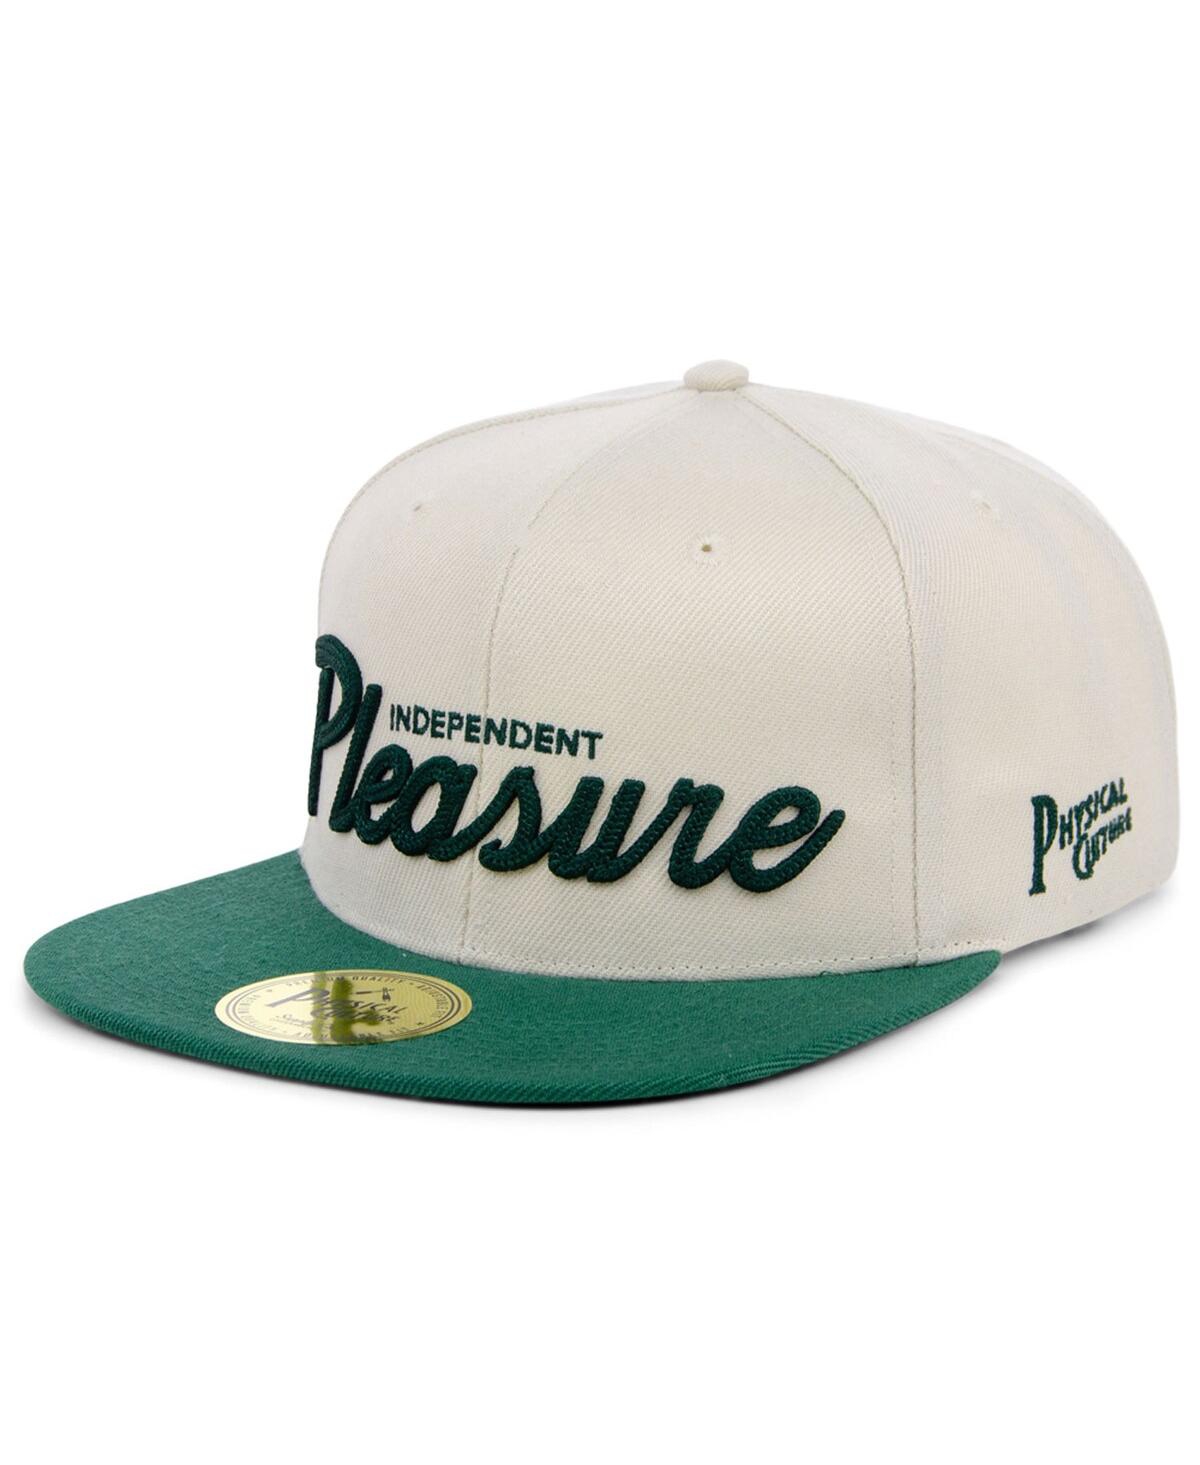 Men's Physical Culture Cream Independent Pleasure Club of New Jersey Black Fives Snapback Adjustable Hat - Cream